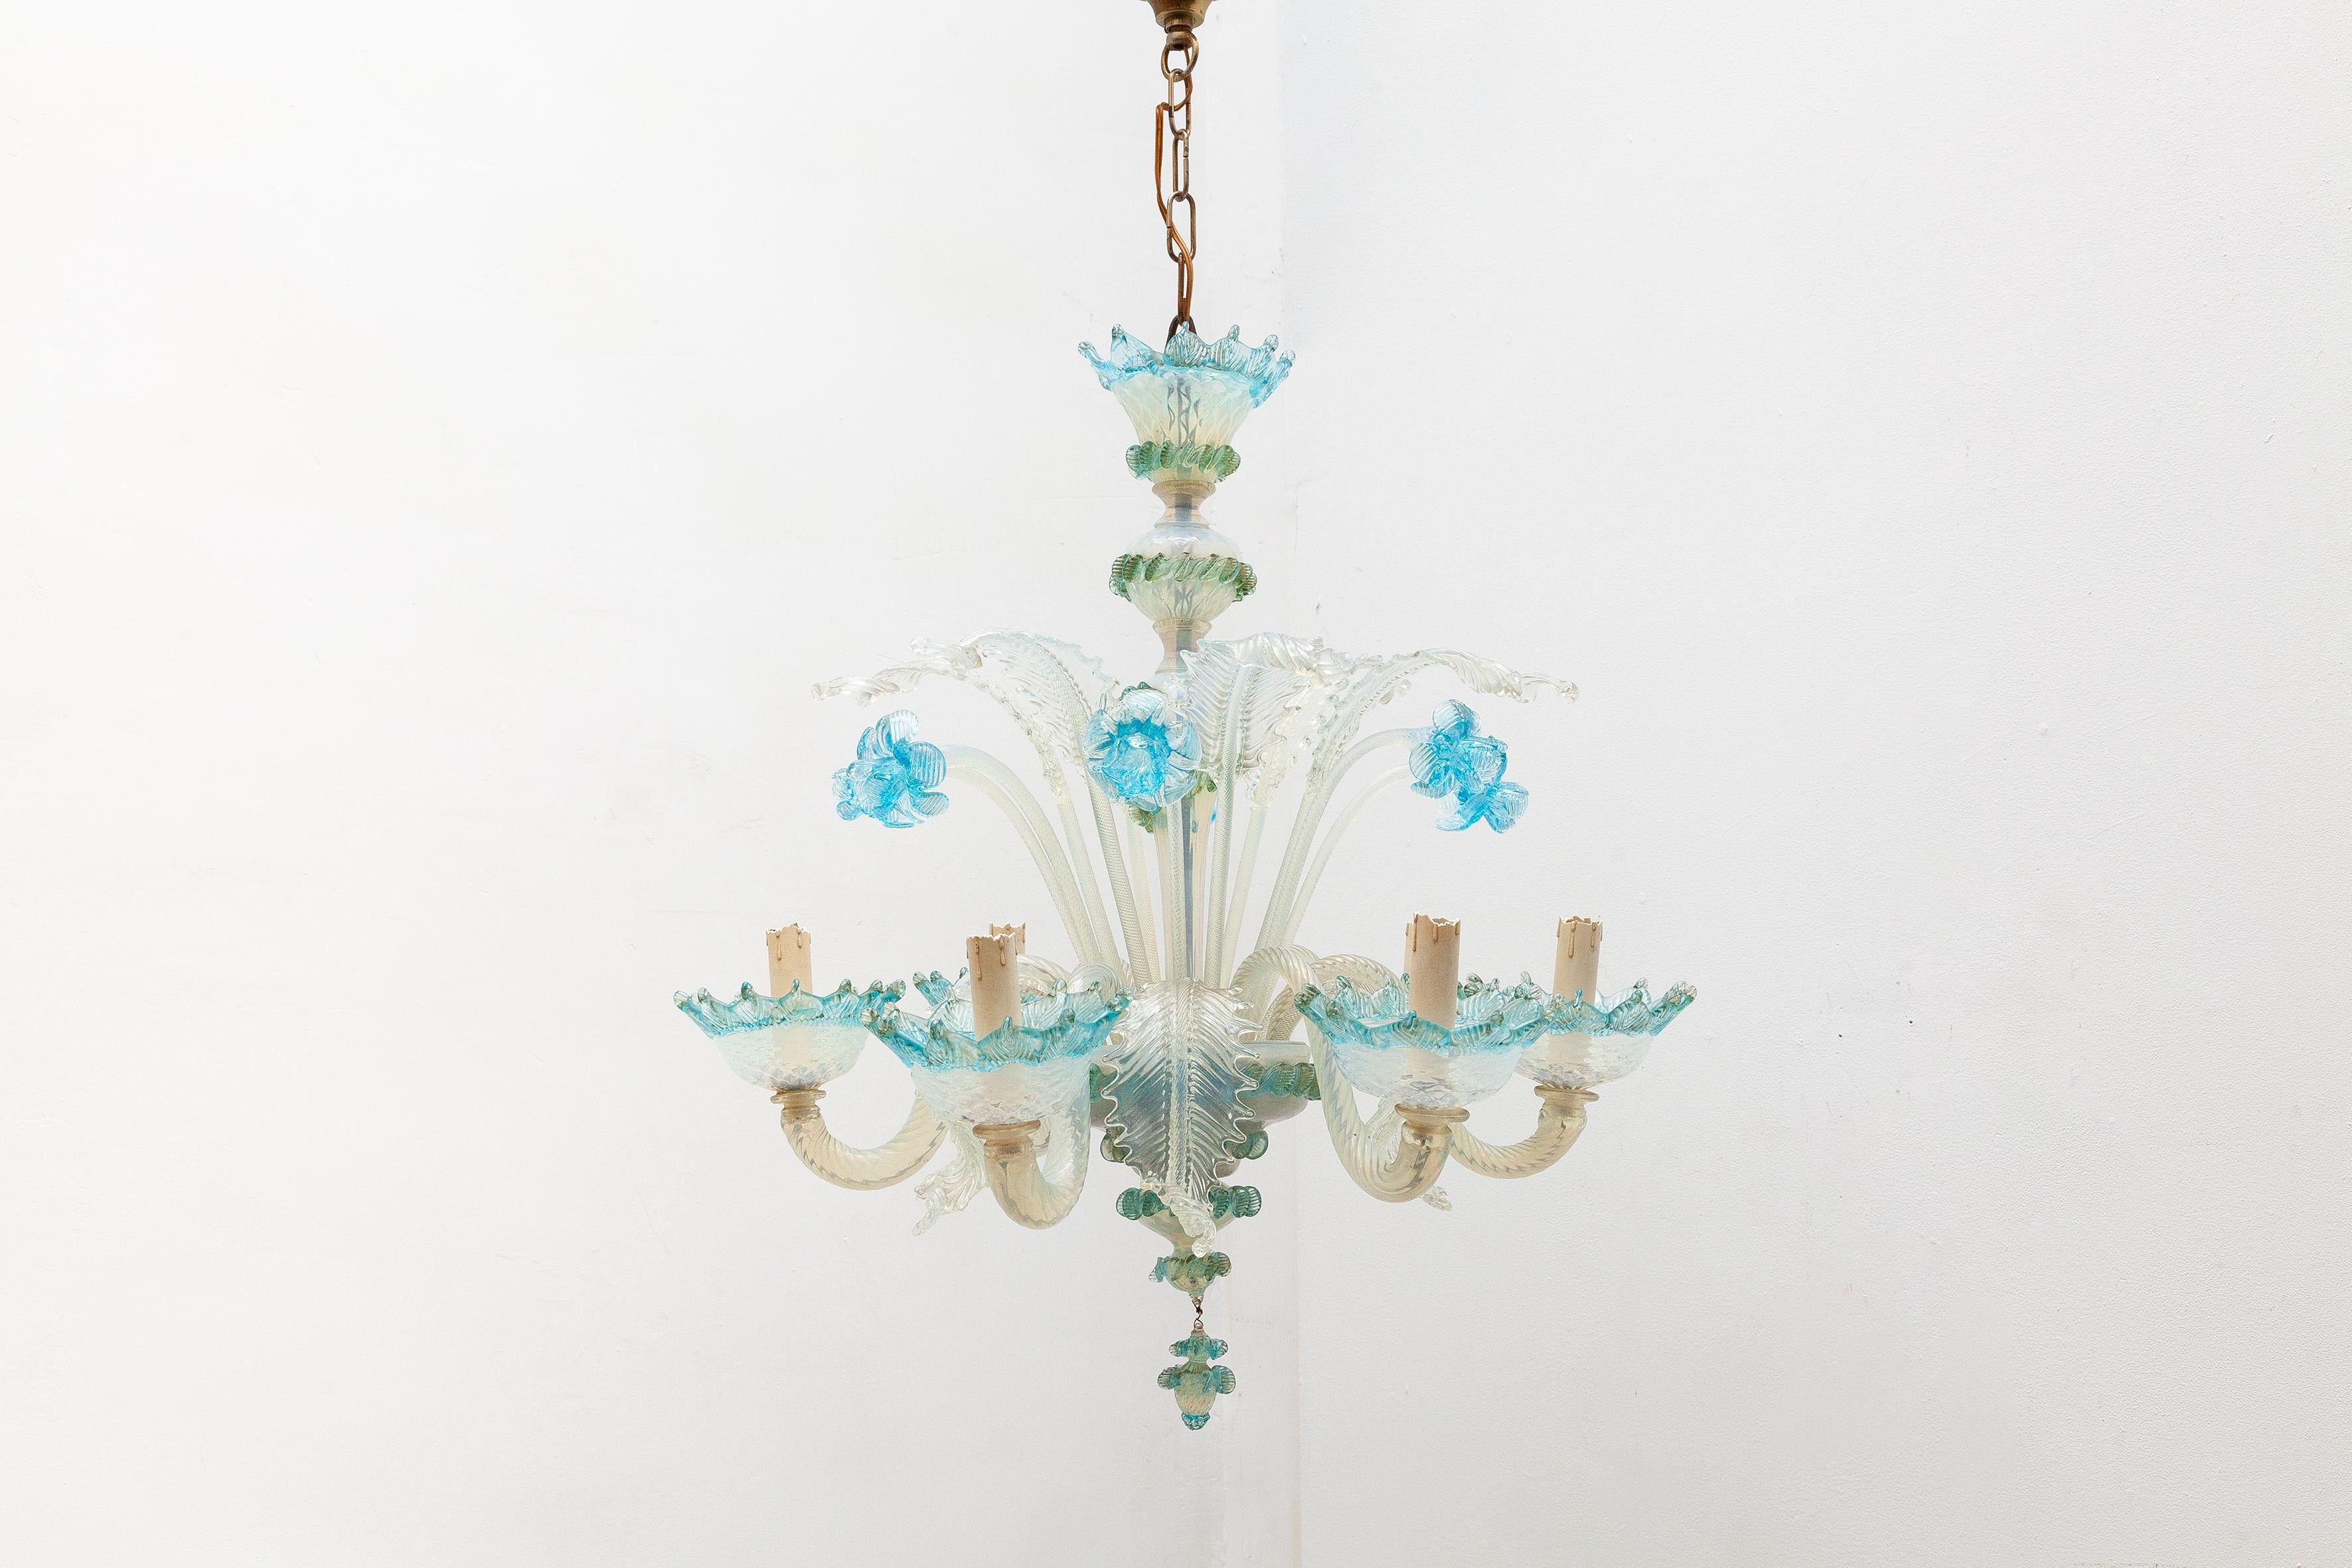 Venetian Murano glass chandelier featuring a design of intricate blue glass flowers and milk glass leaves. Lit by 6 bulbs.

Dimensions: W.55 diameter x 60 H cm :Chain length: 35 H cm.